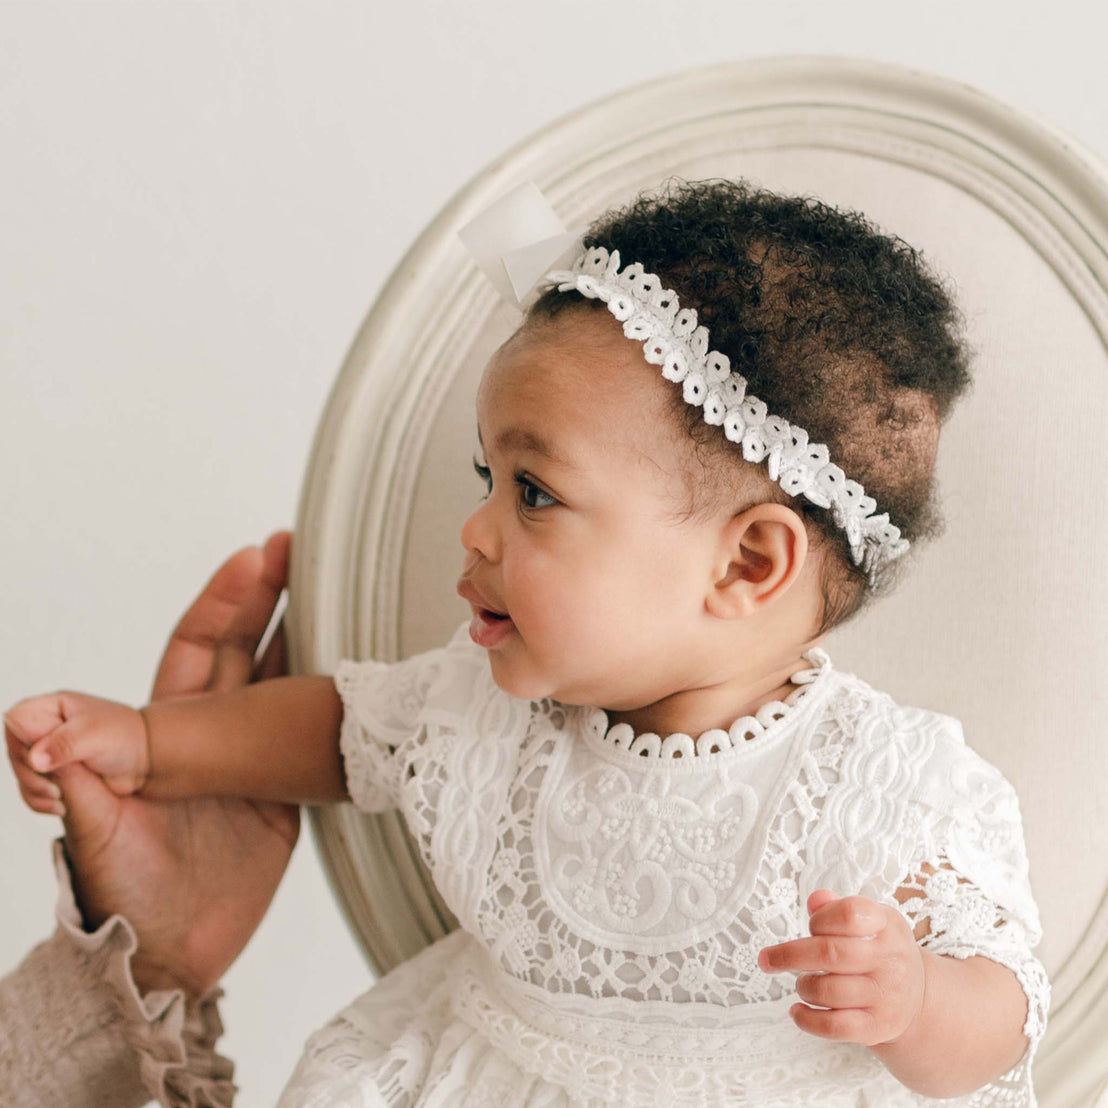 A baby wearing a white lace dress and an Adeline Headband with a silk ribbon bow sits in a round-backed chair. An adult's hand is gently supporting the baby from the side. The baby looks to the right with a curious expression.